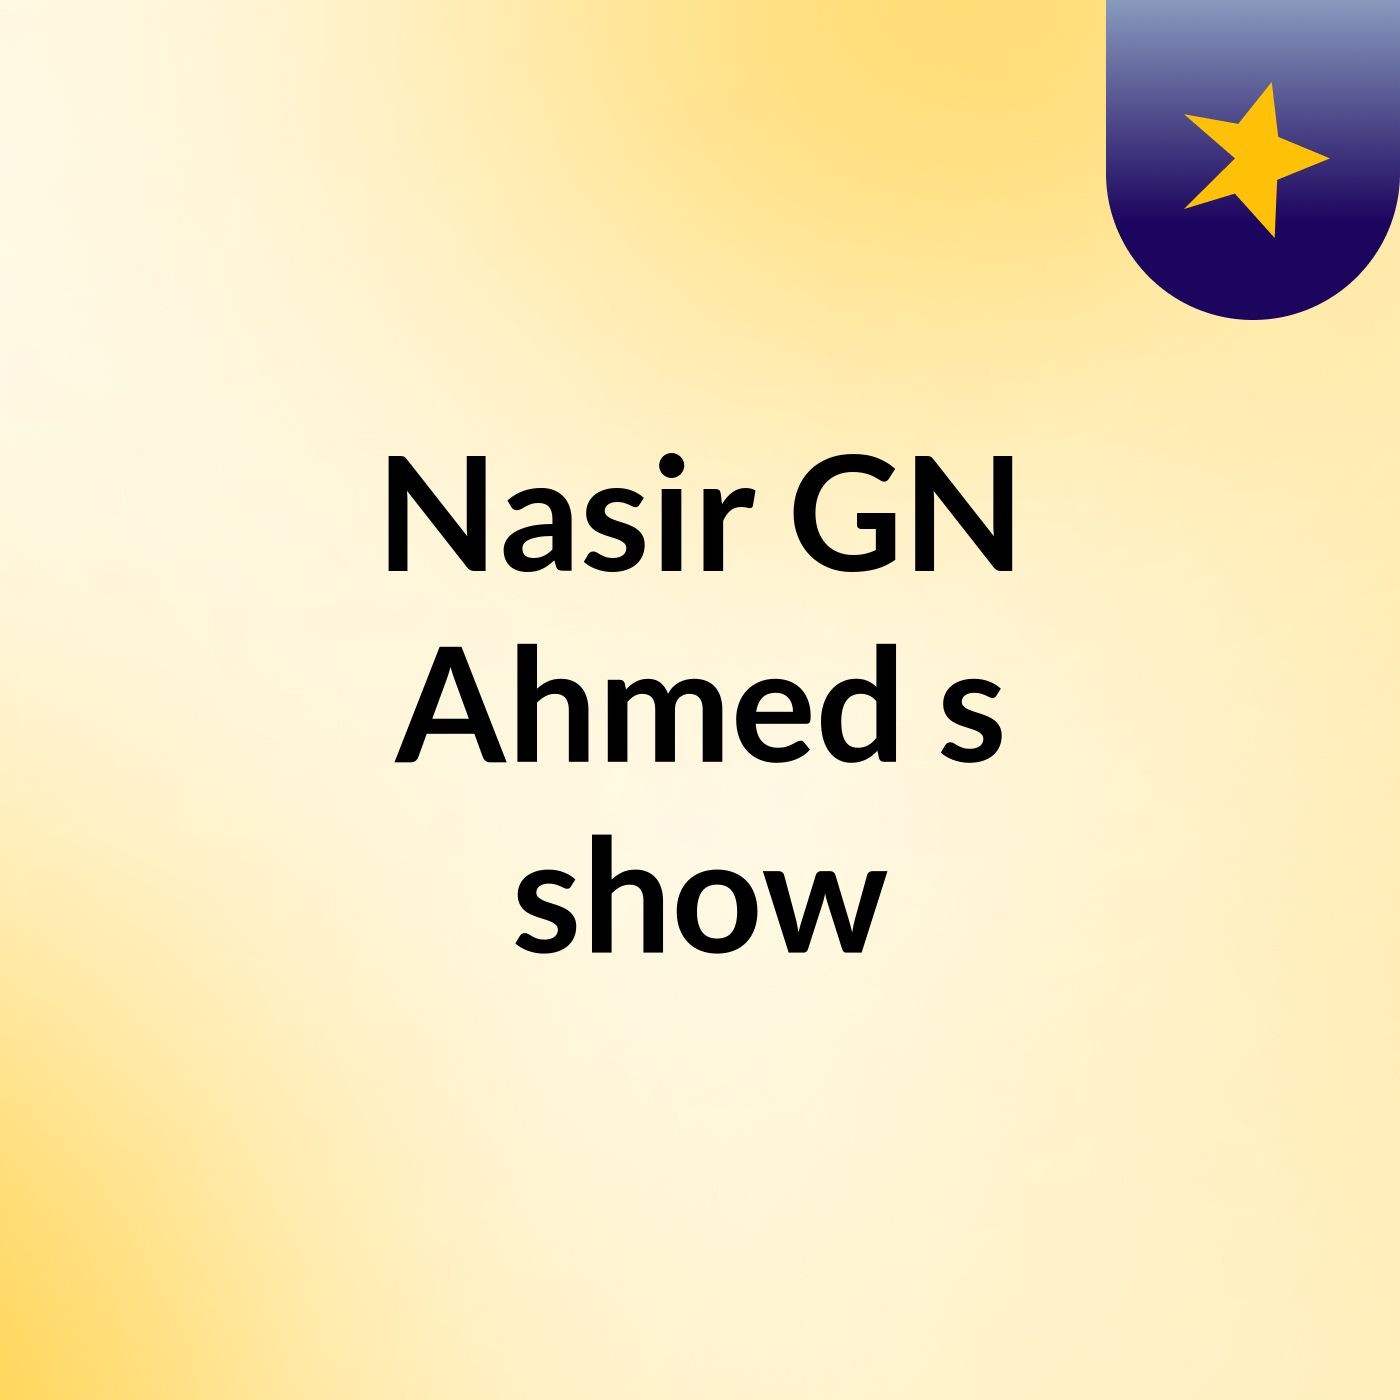 Nasir GN Ahmed's show